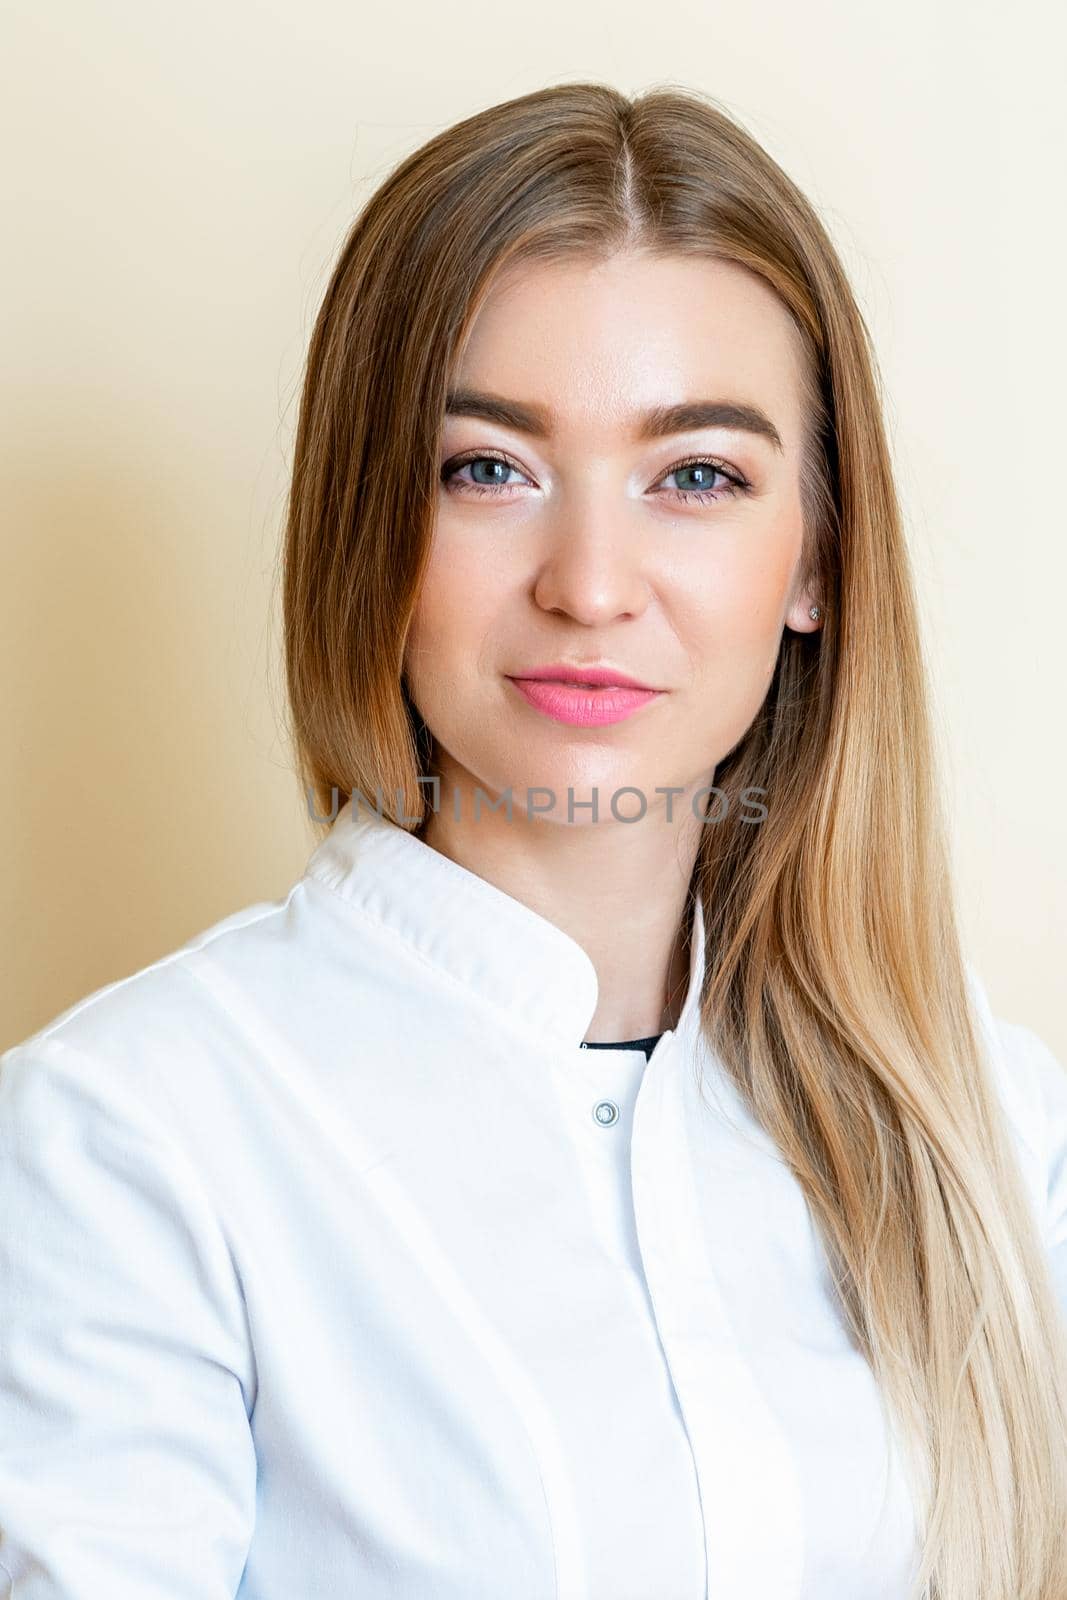 Vertical portrait of beautiful young woman wearing white shirt on yellow background.